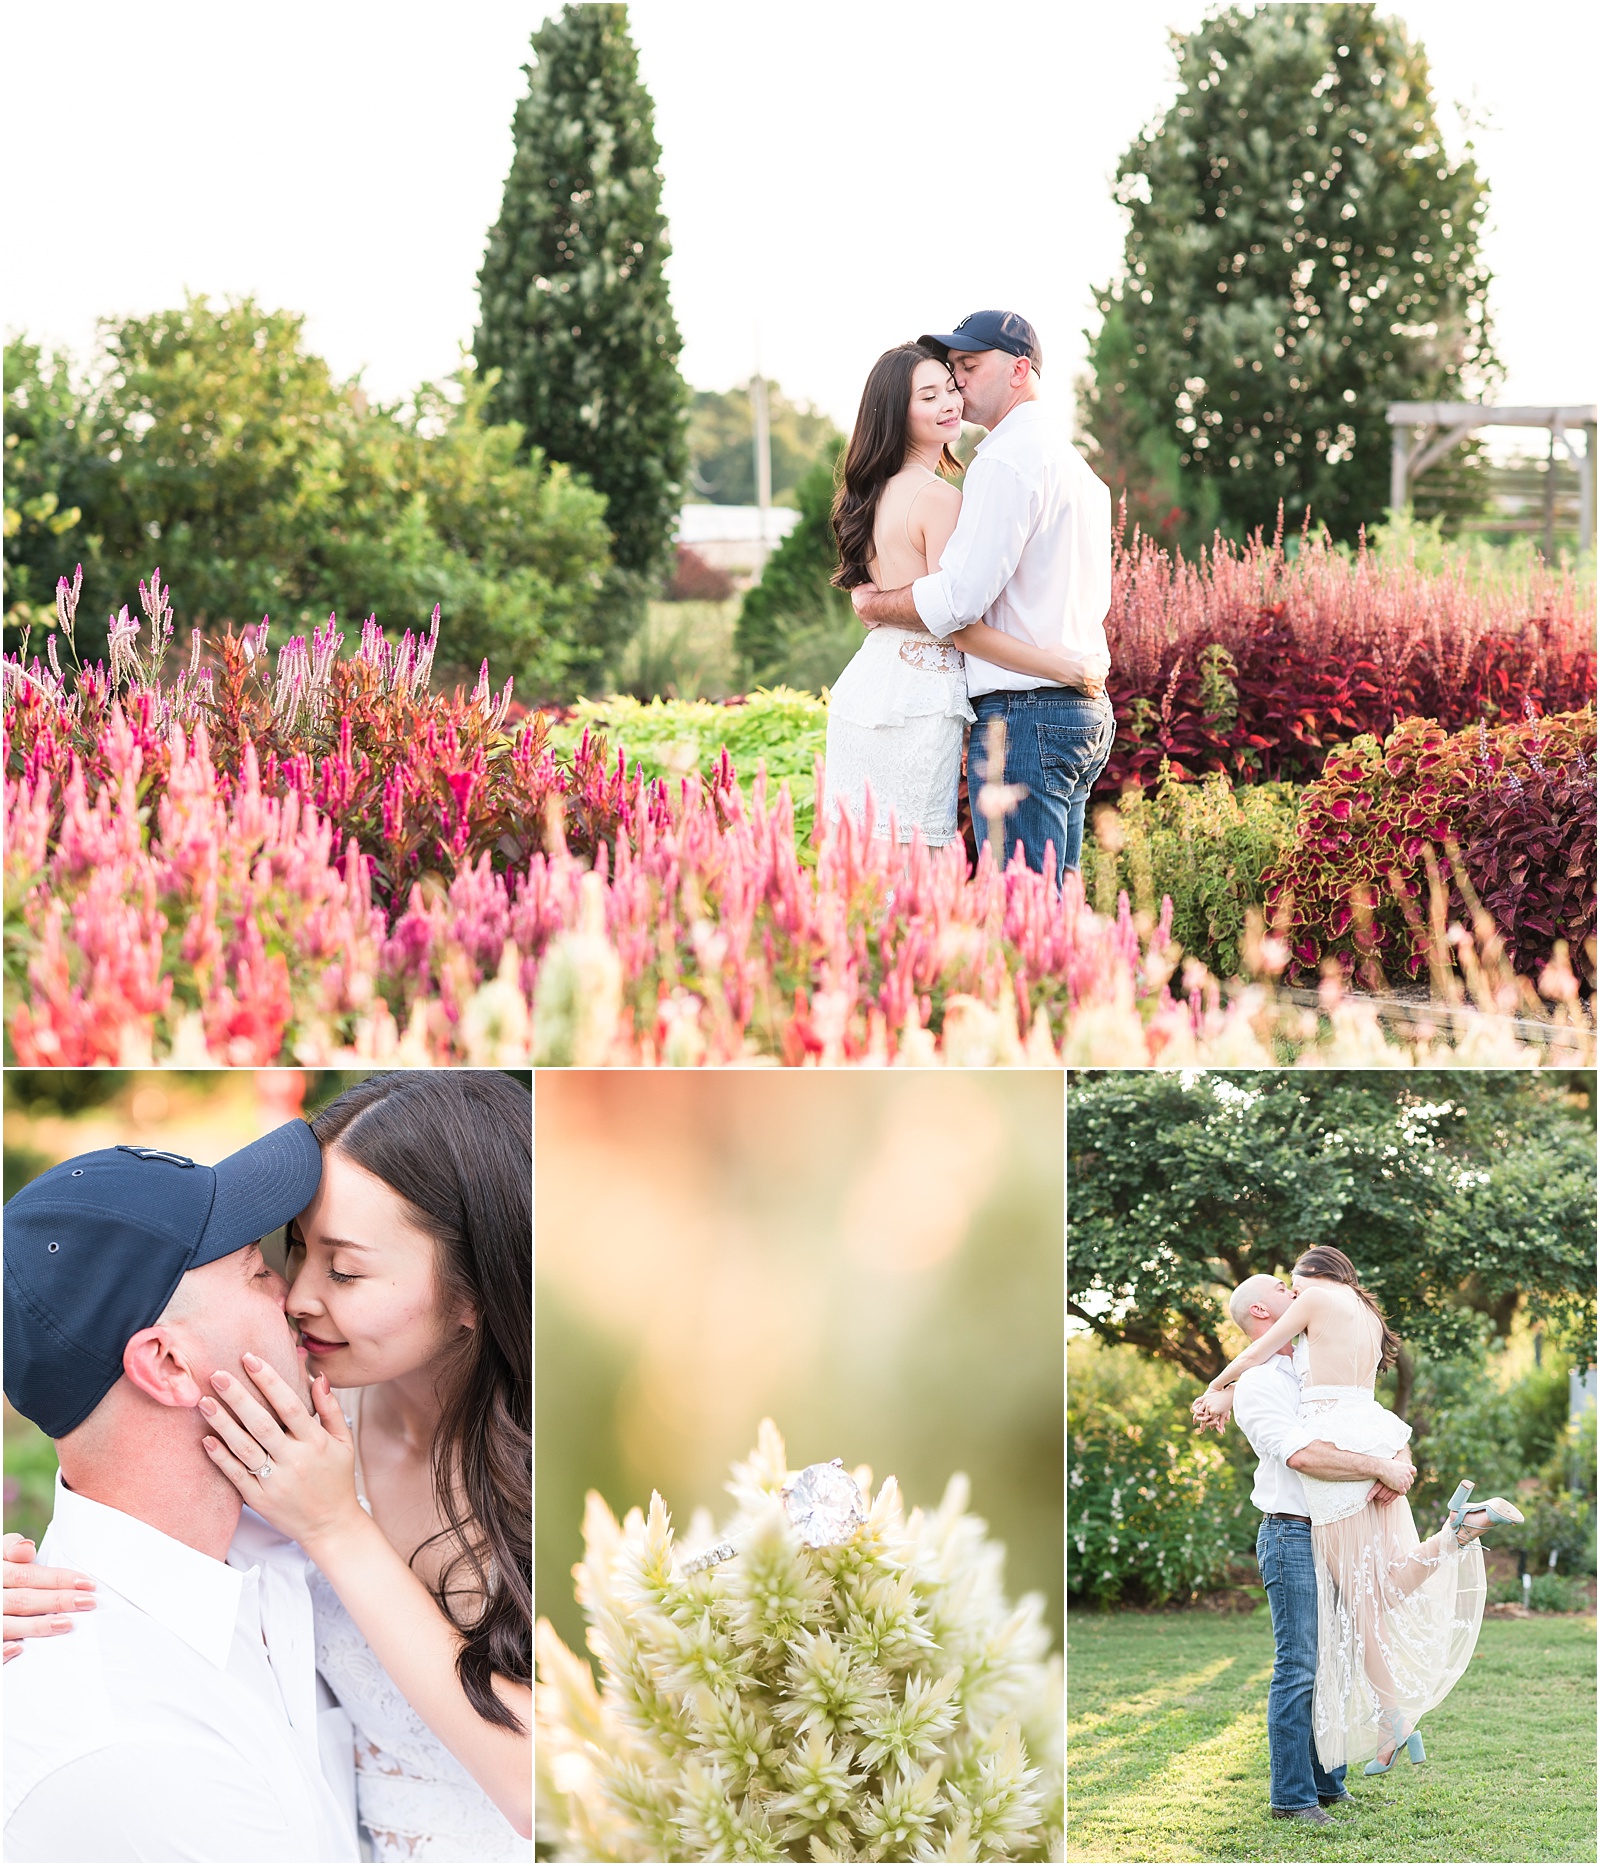 engagement session photo college in flower garden with close up ring shot, gentlemen lifting lady in white dress, close up intimate almost kissing photograph at JC Raulston Arboretum